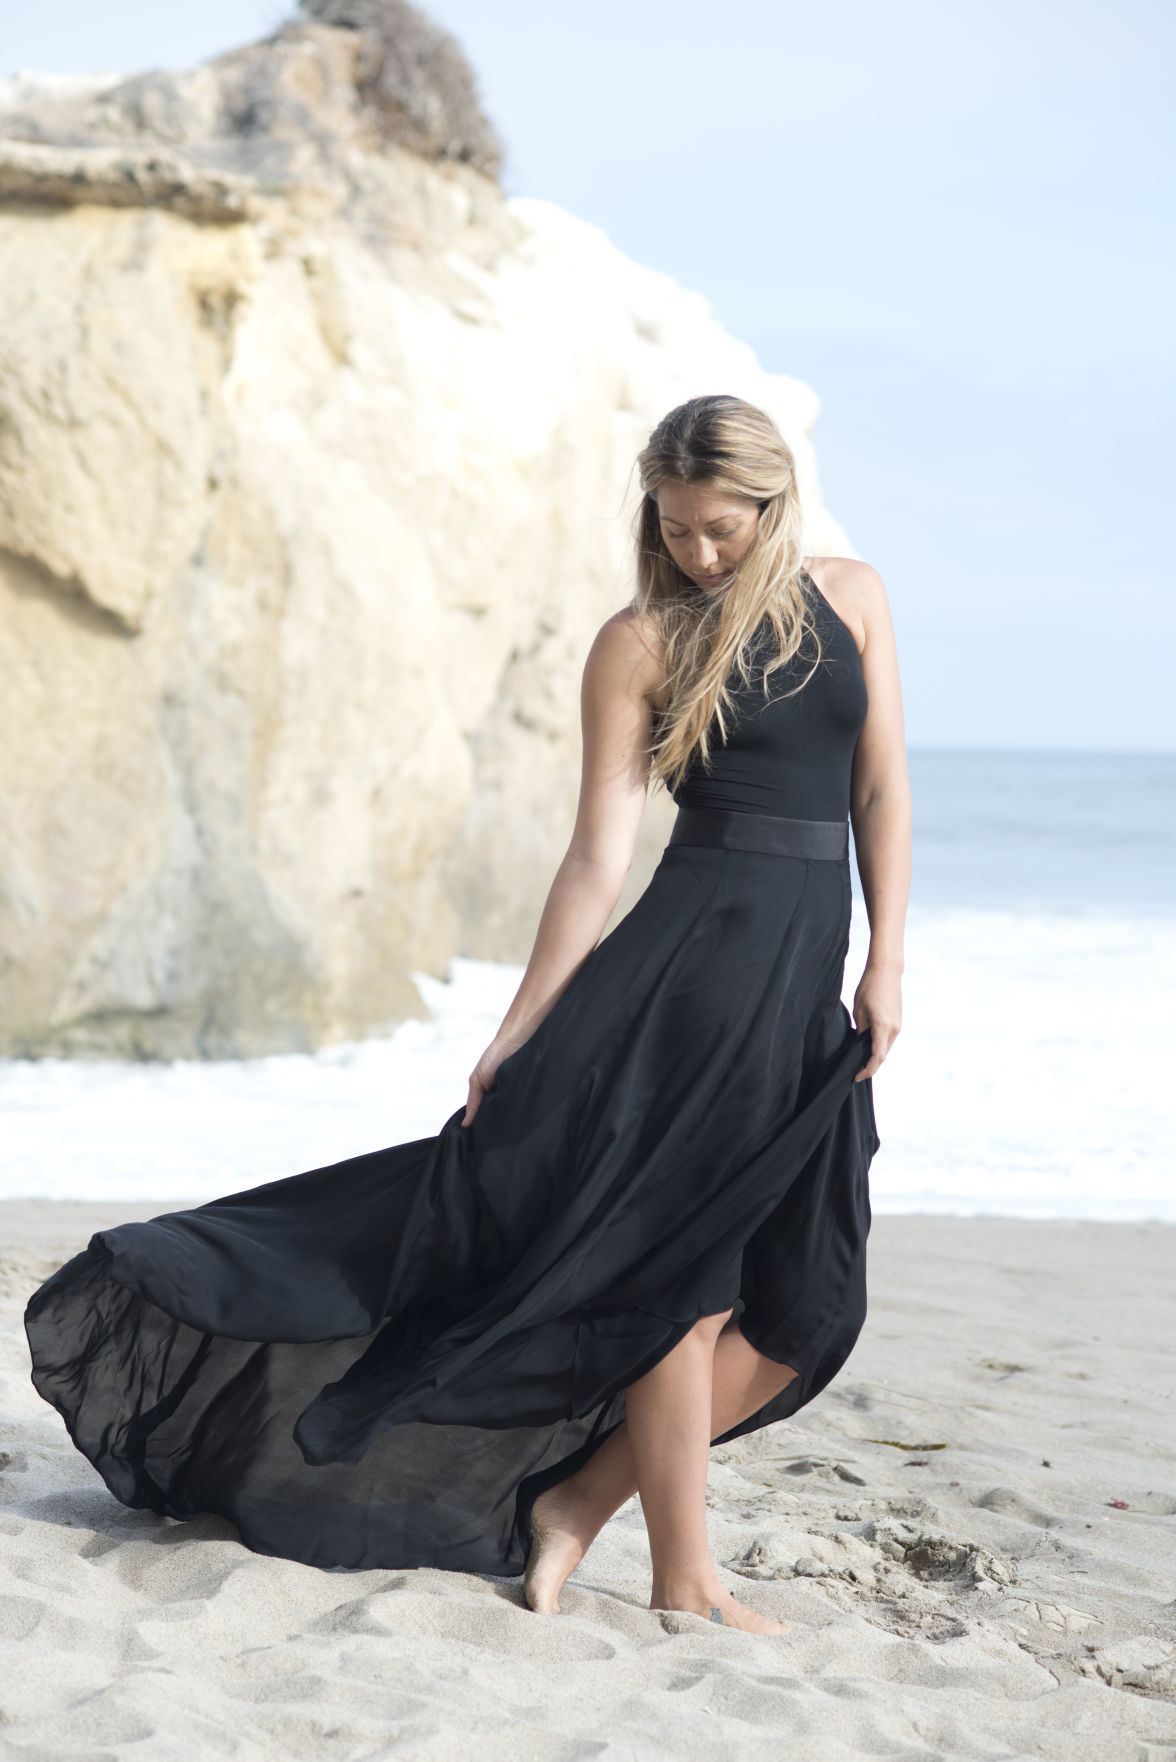 Colbie Caillat photo 459 of 464 pics, wallpaper - photo #1084937 ...